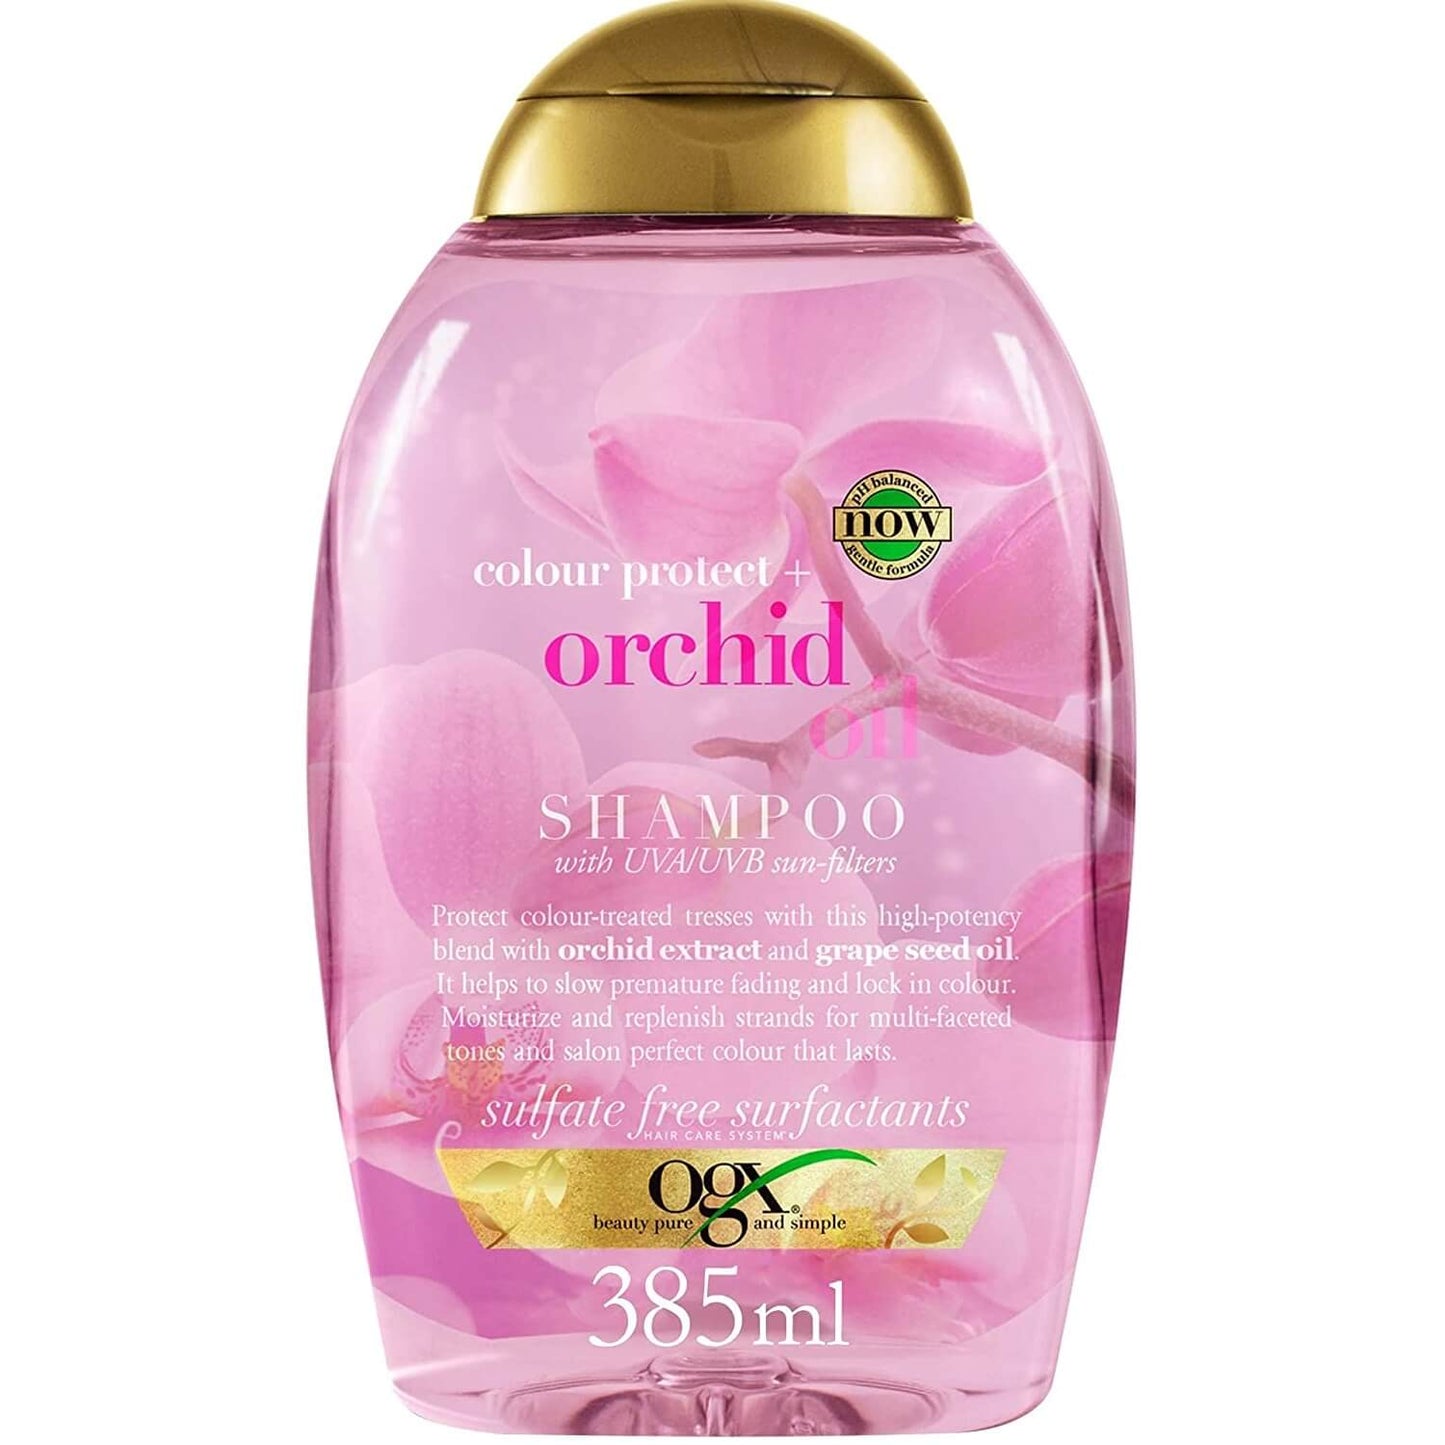 OGX (UK) Colour Protect Orchid Oil Shampoo 385ml